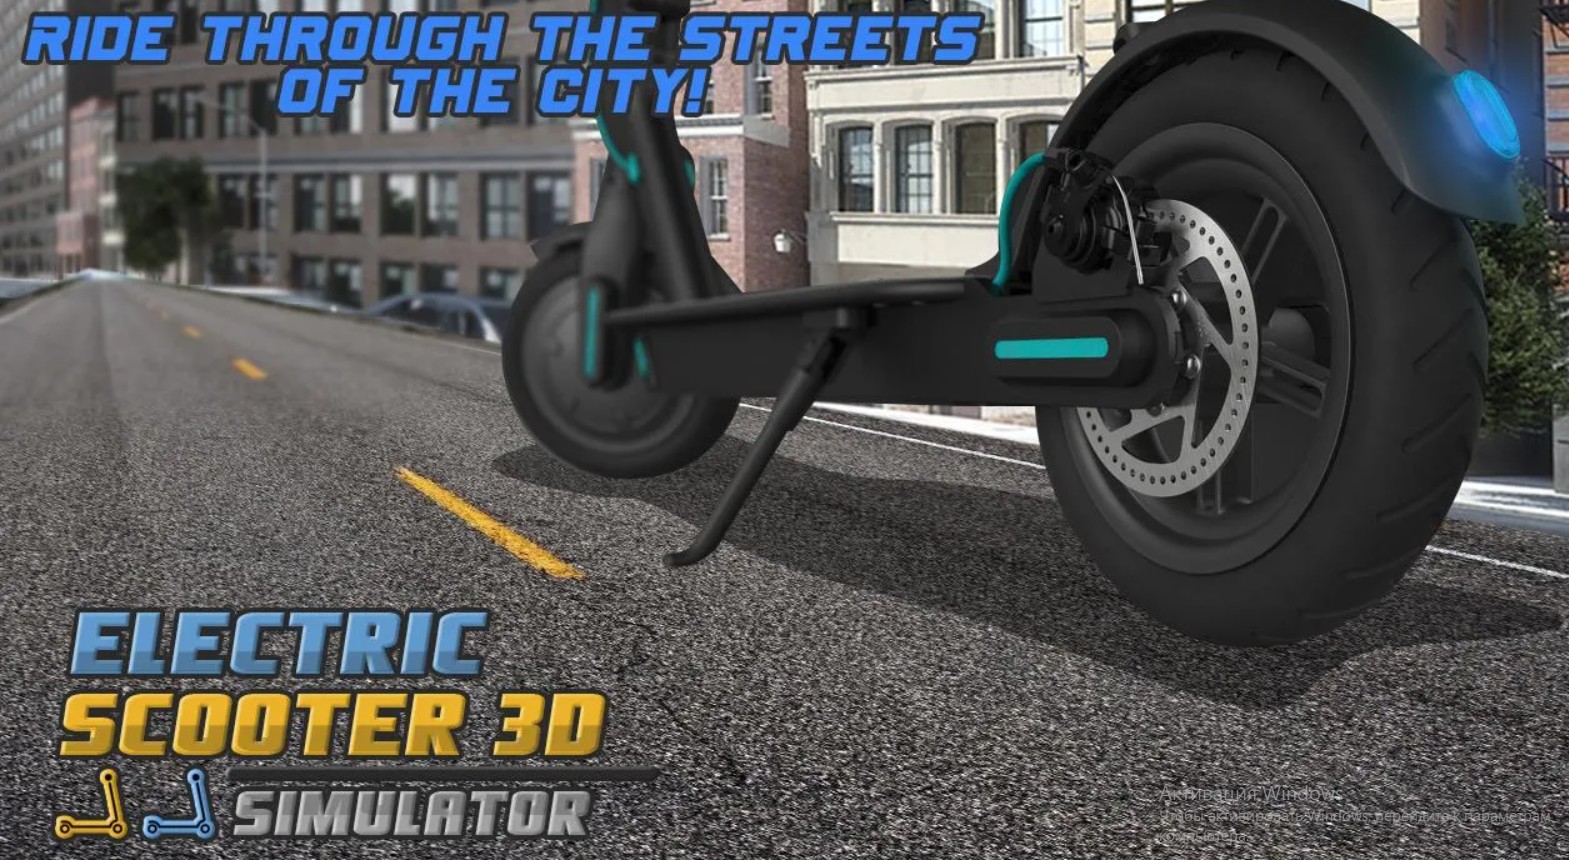 Electric Scooter 3D Simulator
1